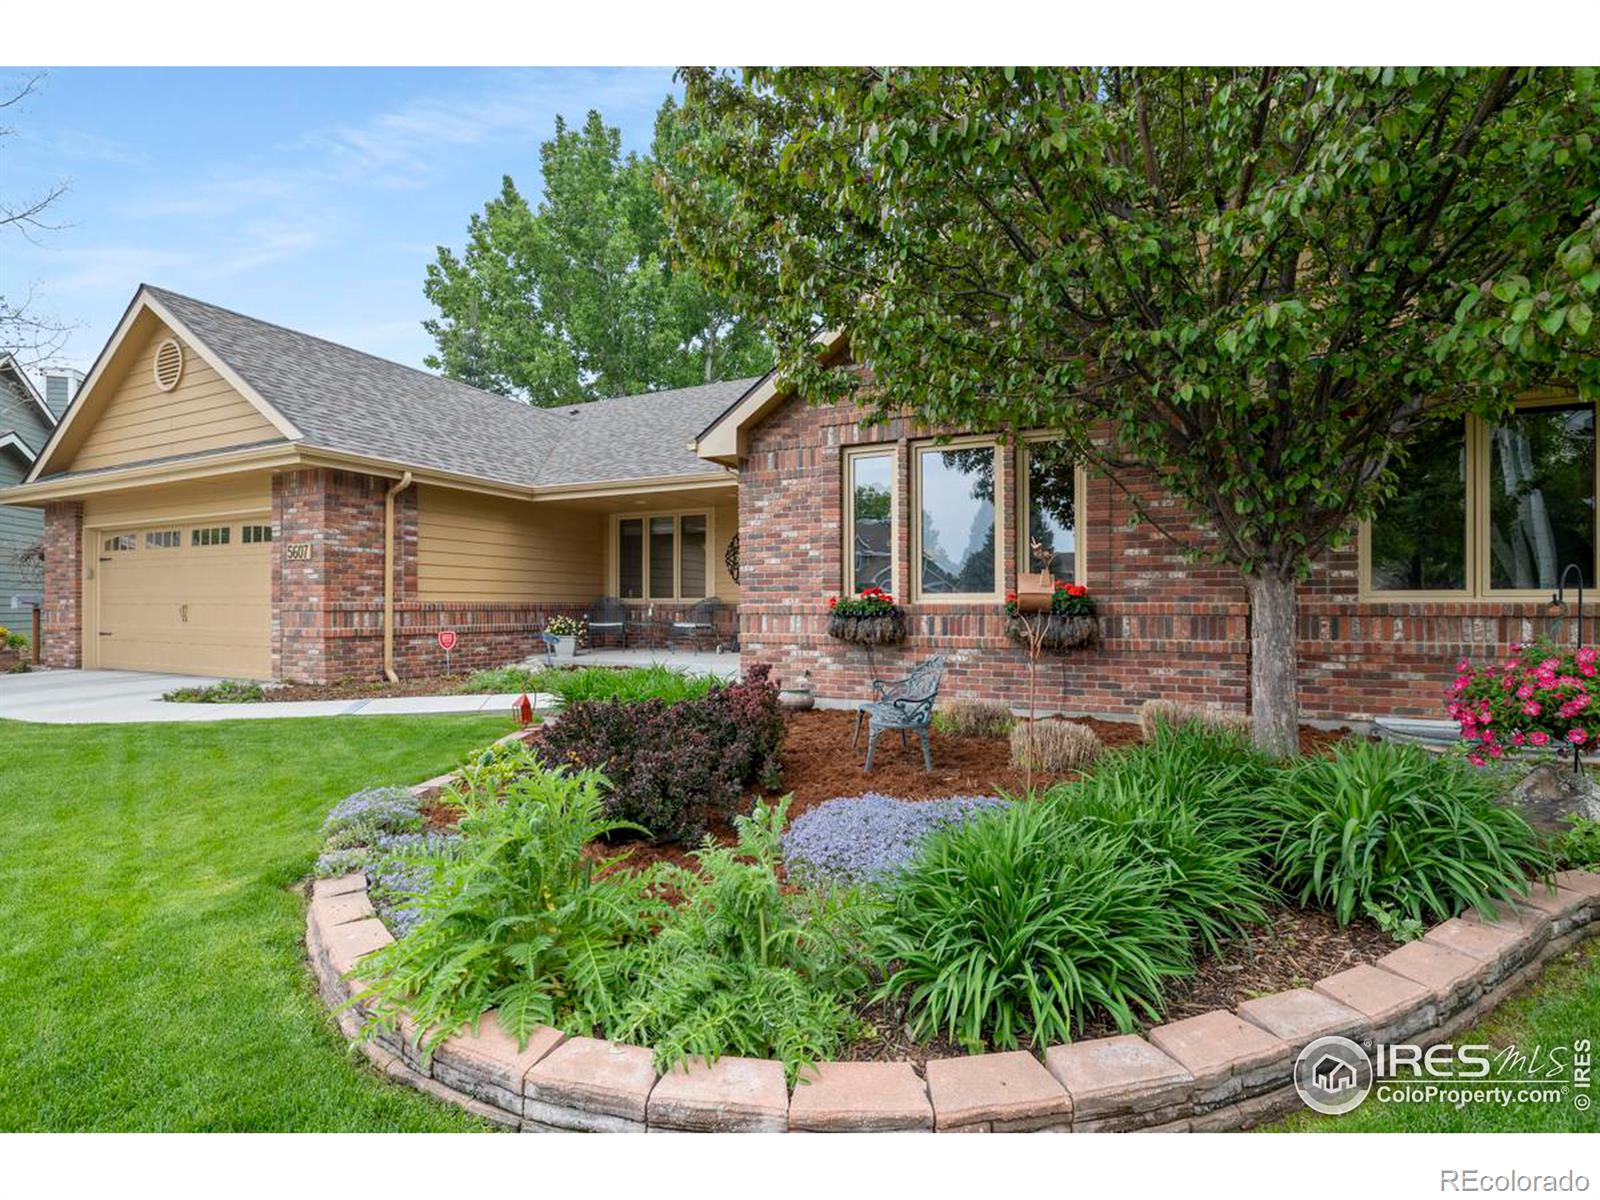 Report Image for 5607  Willow Springs Court,Fort Collins, Colorado